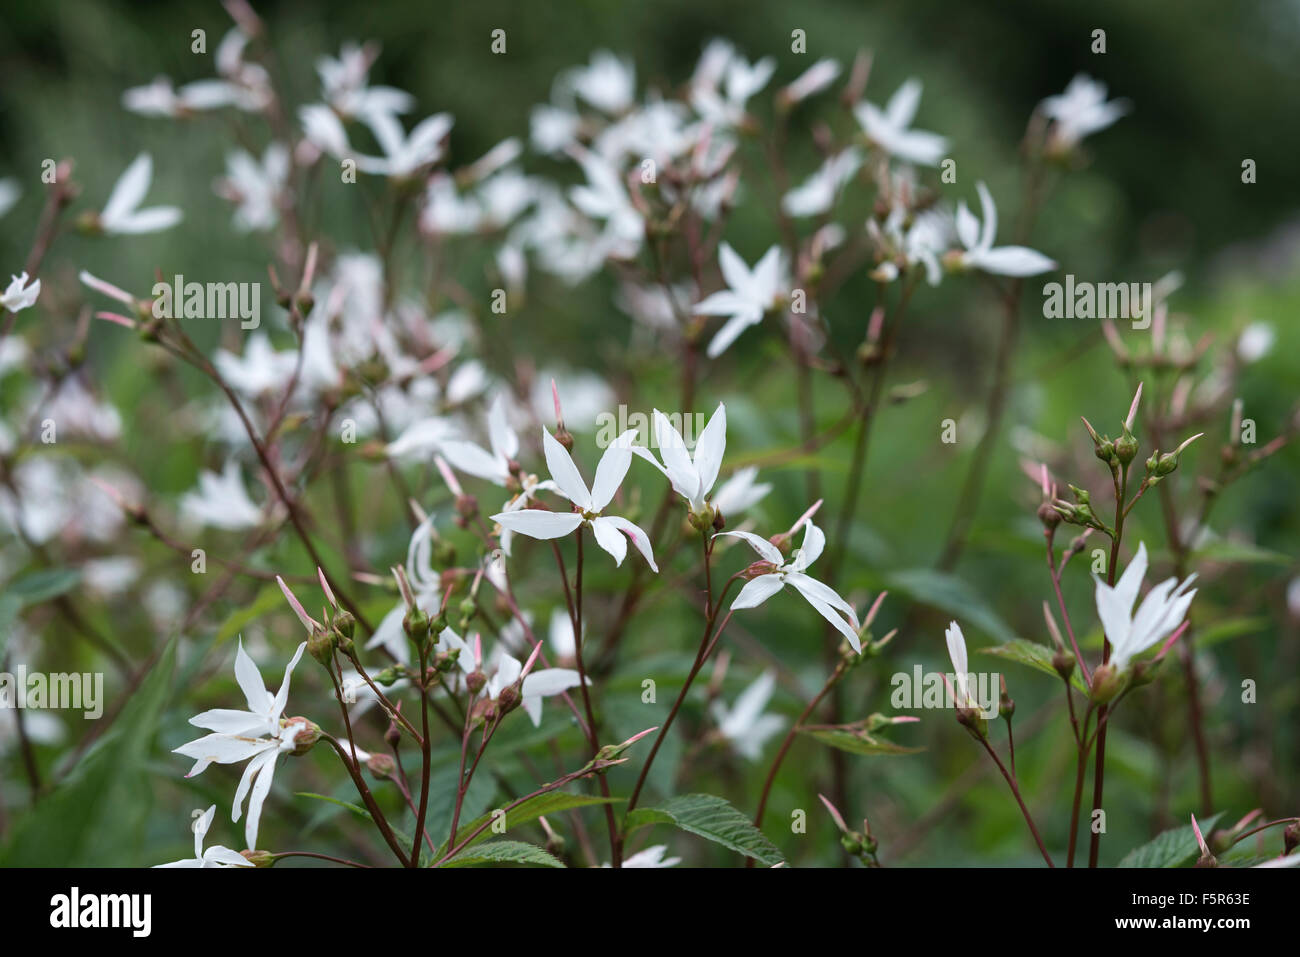 Gillenia trifoliata with masses of tiny white flowers growing in an English cottage garden. Stock Photo